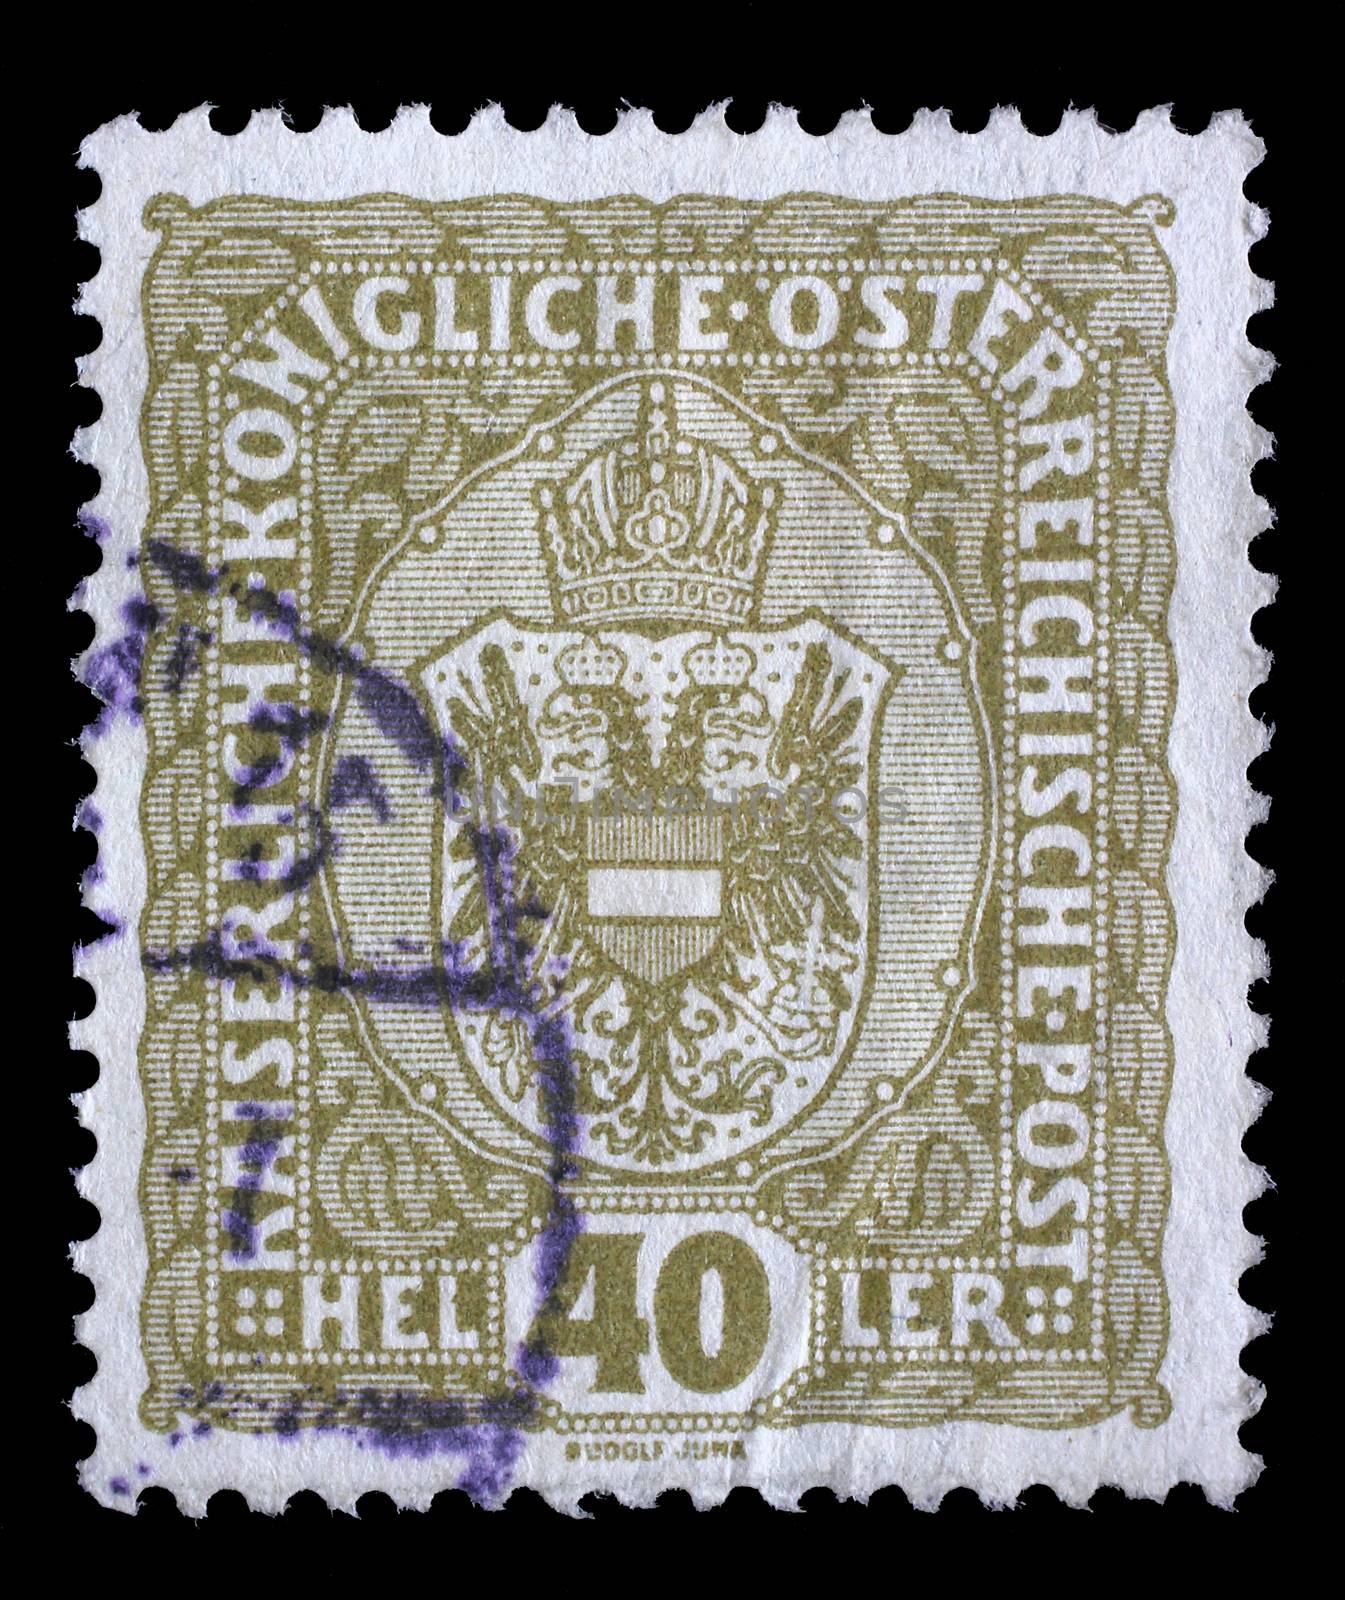 Stamp printed by Austria, shows crown and eagle, circa 1916